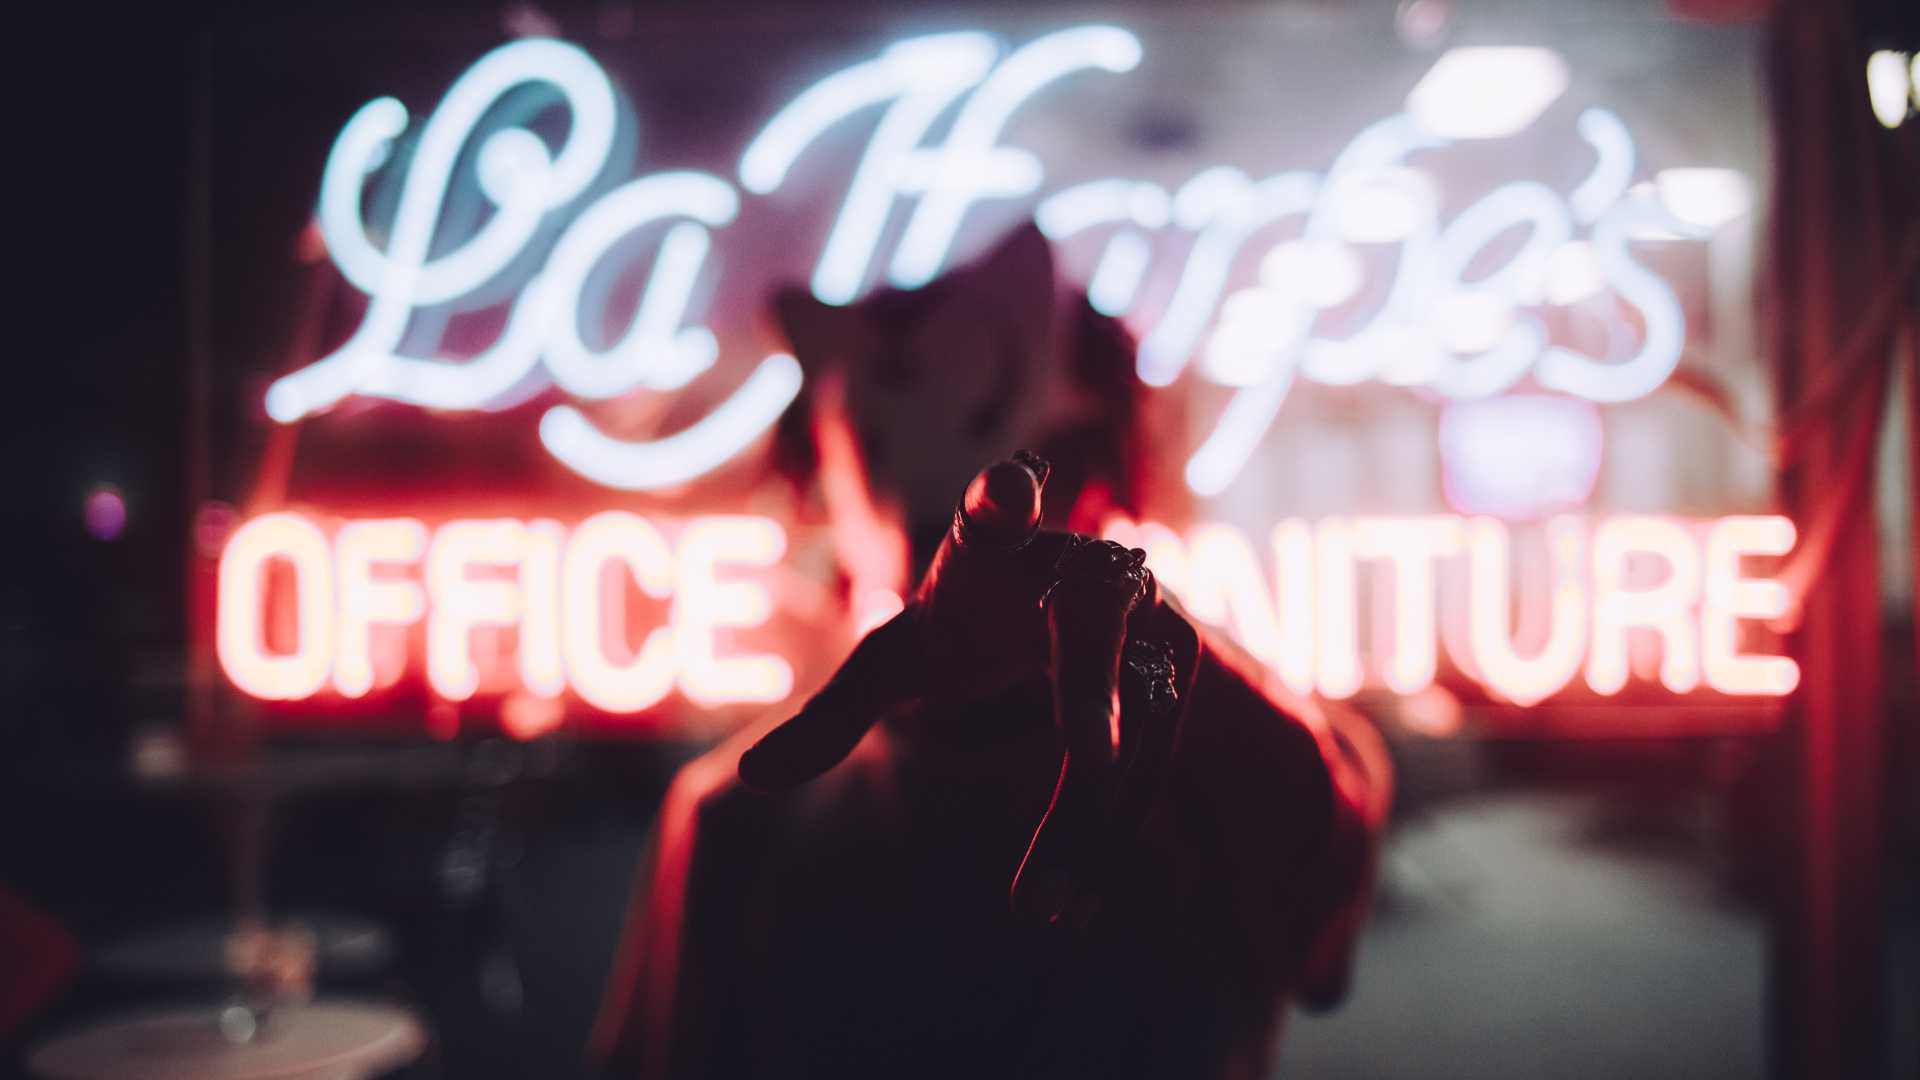 Person in Red Jacket Standing in Front of Red and White Neon Light Signage. Wallpaper in 1920x1080 Resolution